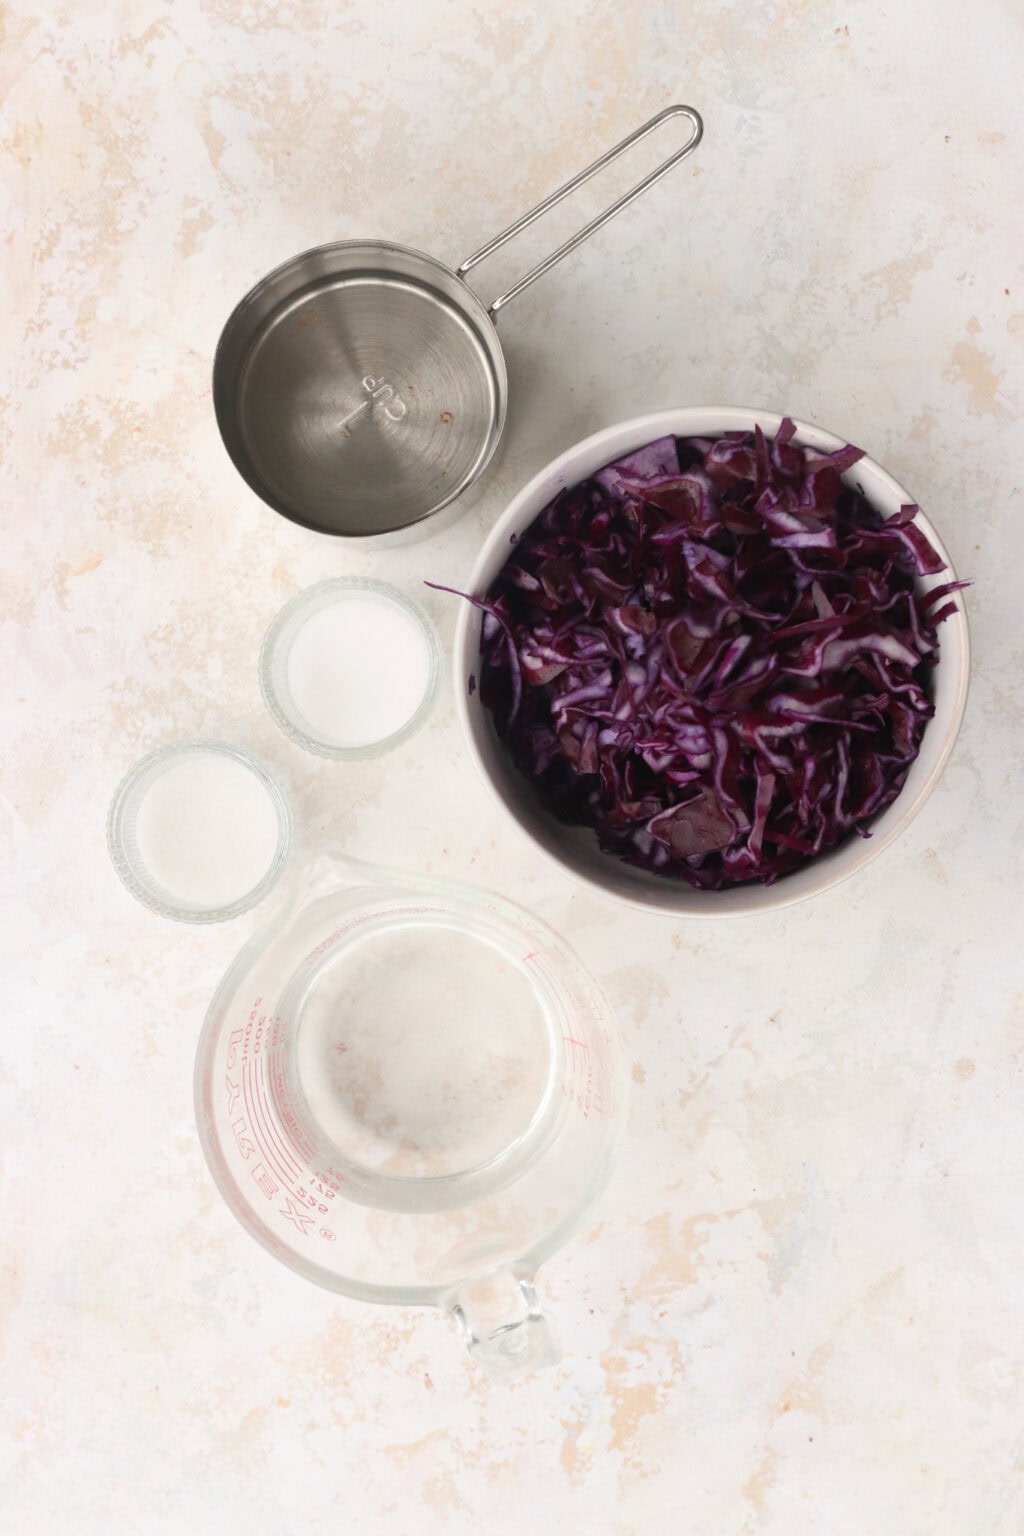 Ingredients for quick pickled red cabbage, including shredded red cabbage, sugar, salt, vinegar, and water